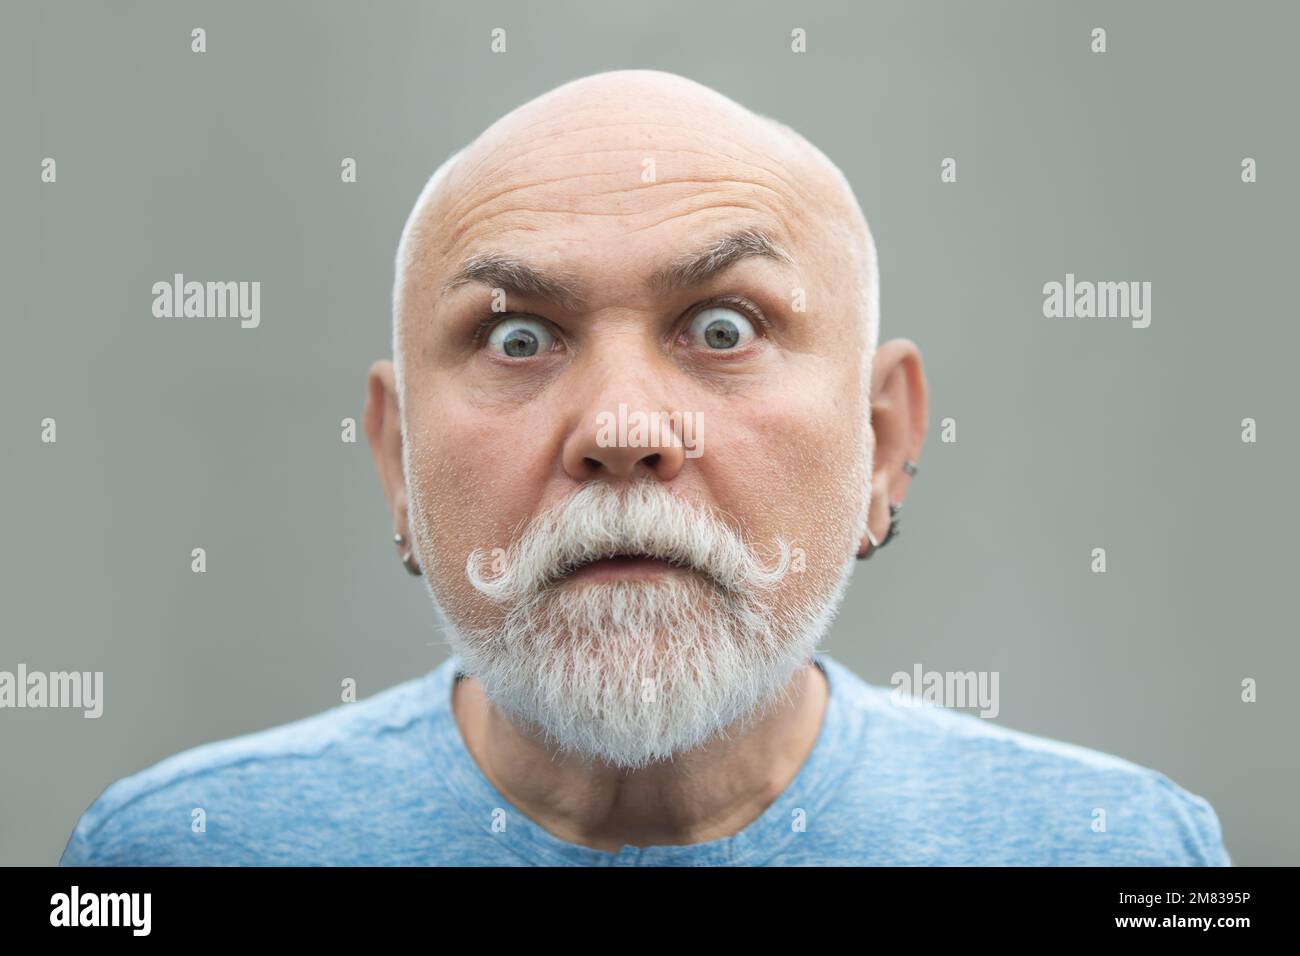 Surprised old mature man face. Closeup emotional portrait of an old mature senior man with grey beard isolated on studio background. Emotions faces. Stock Photo